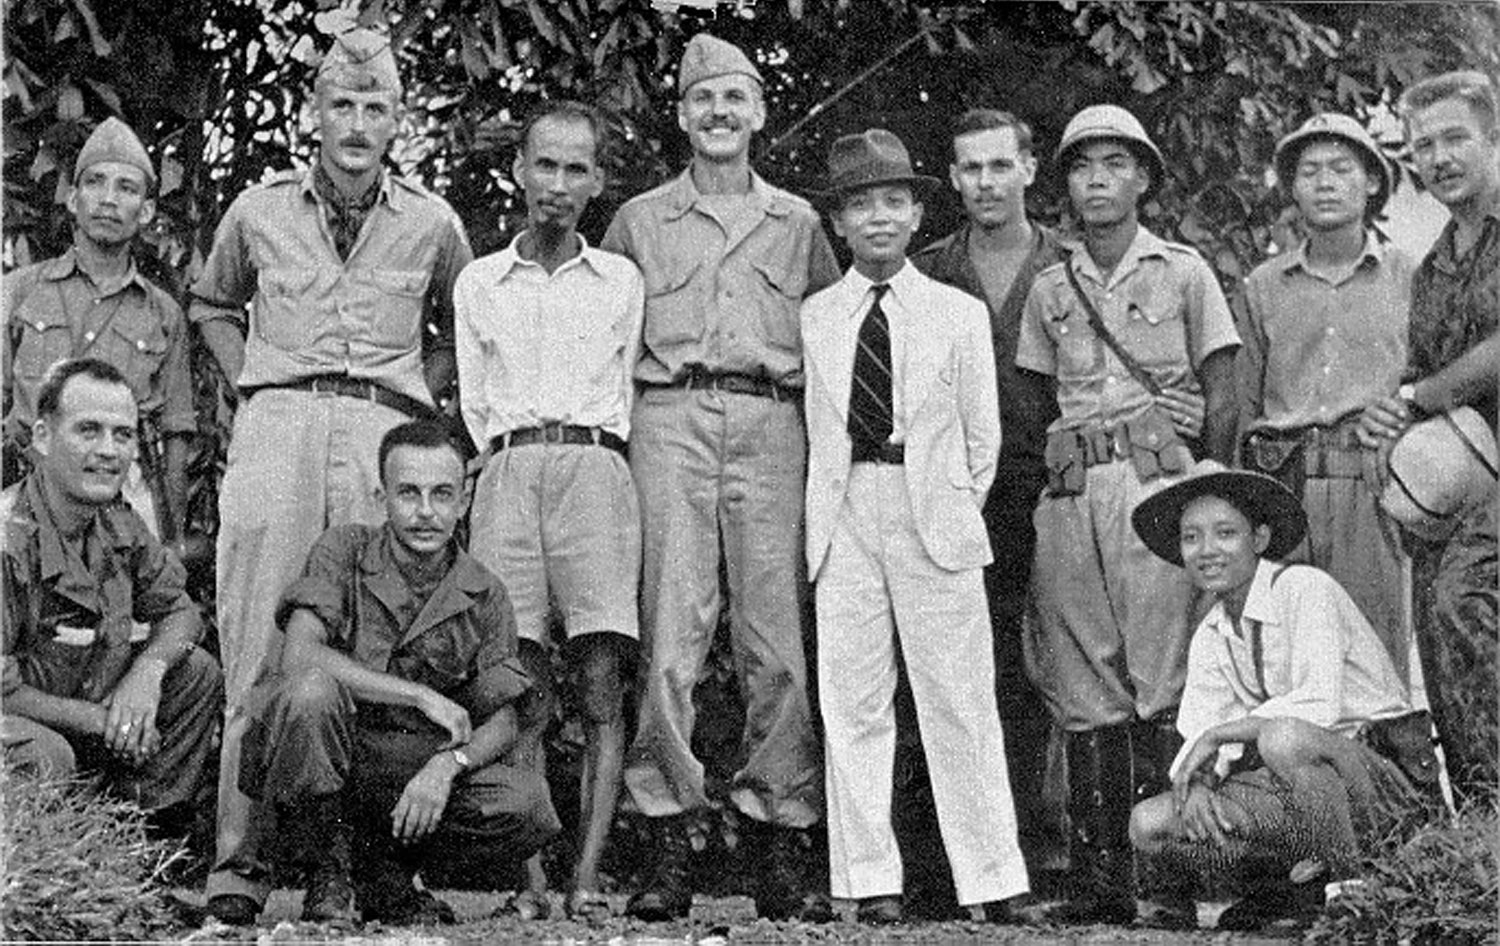 Ho_Chi_Minh_third_from_left_standing_and_the_OSS_in_1945.jpg